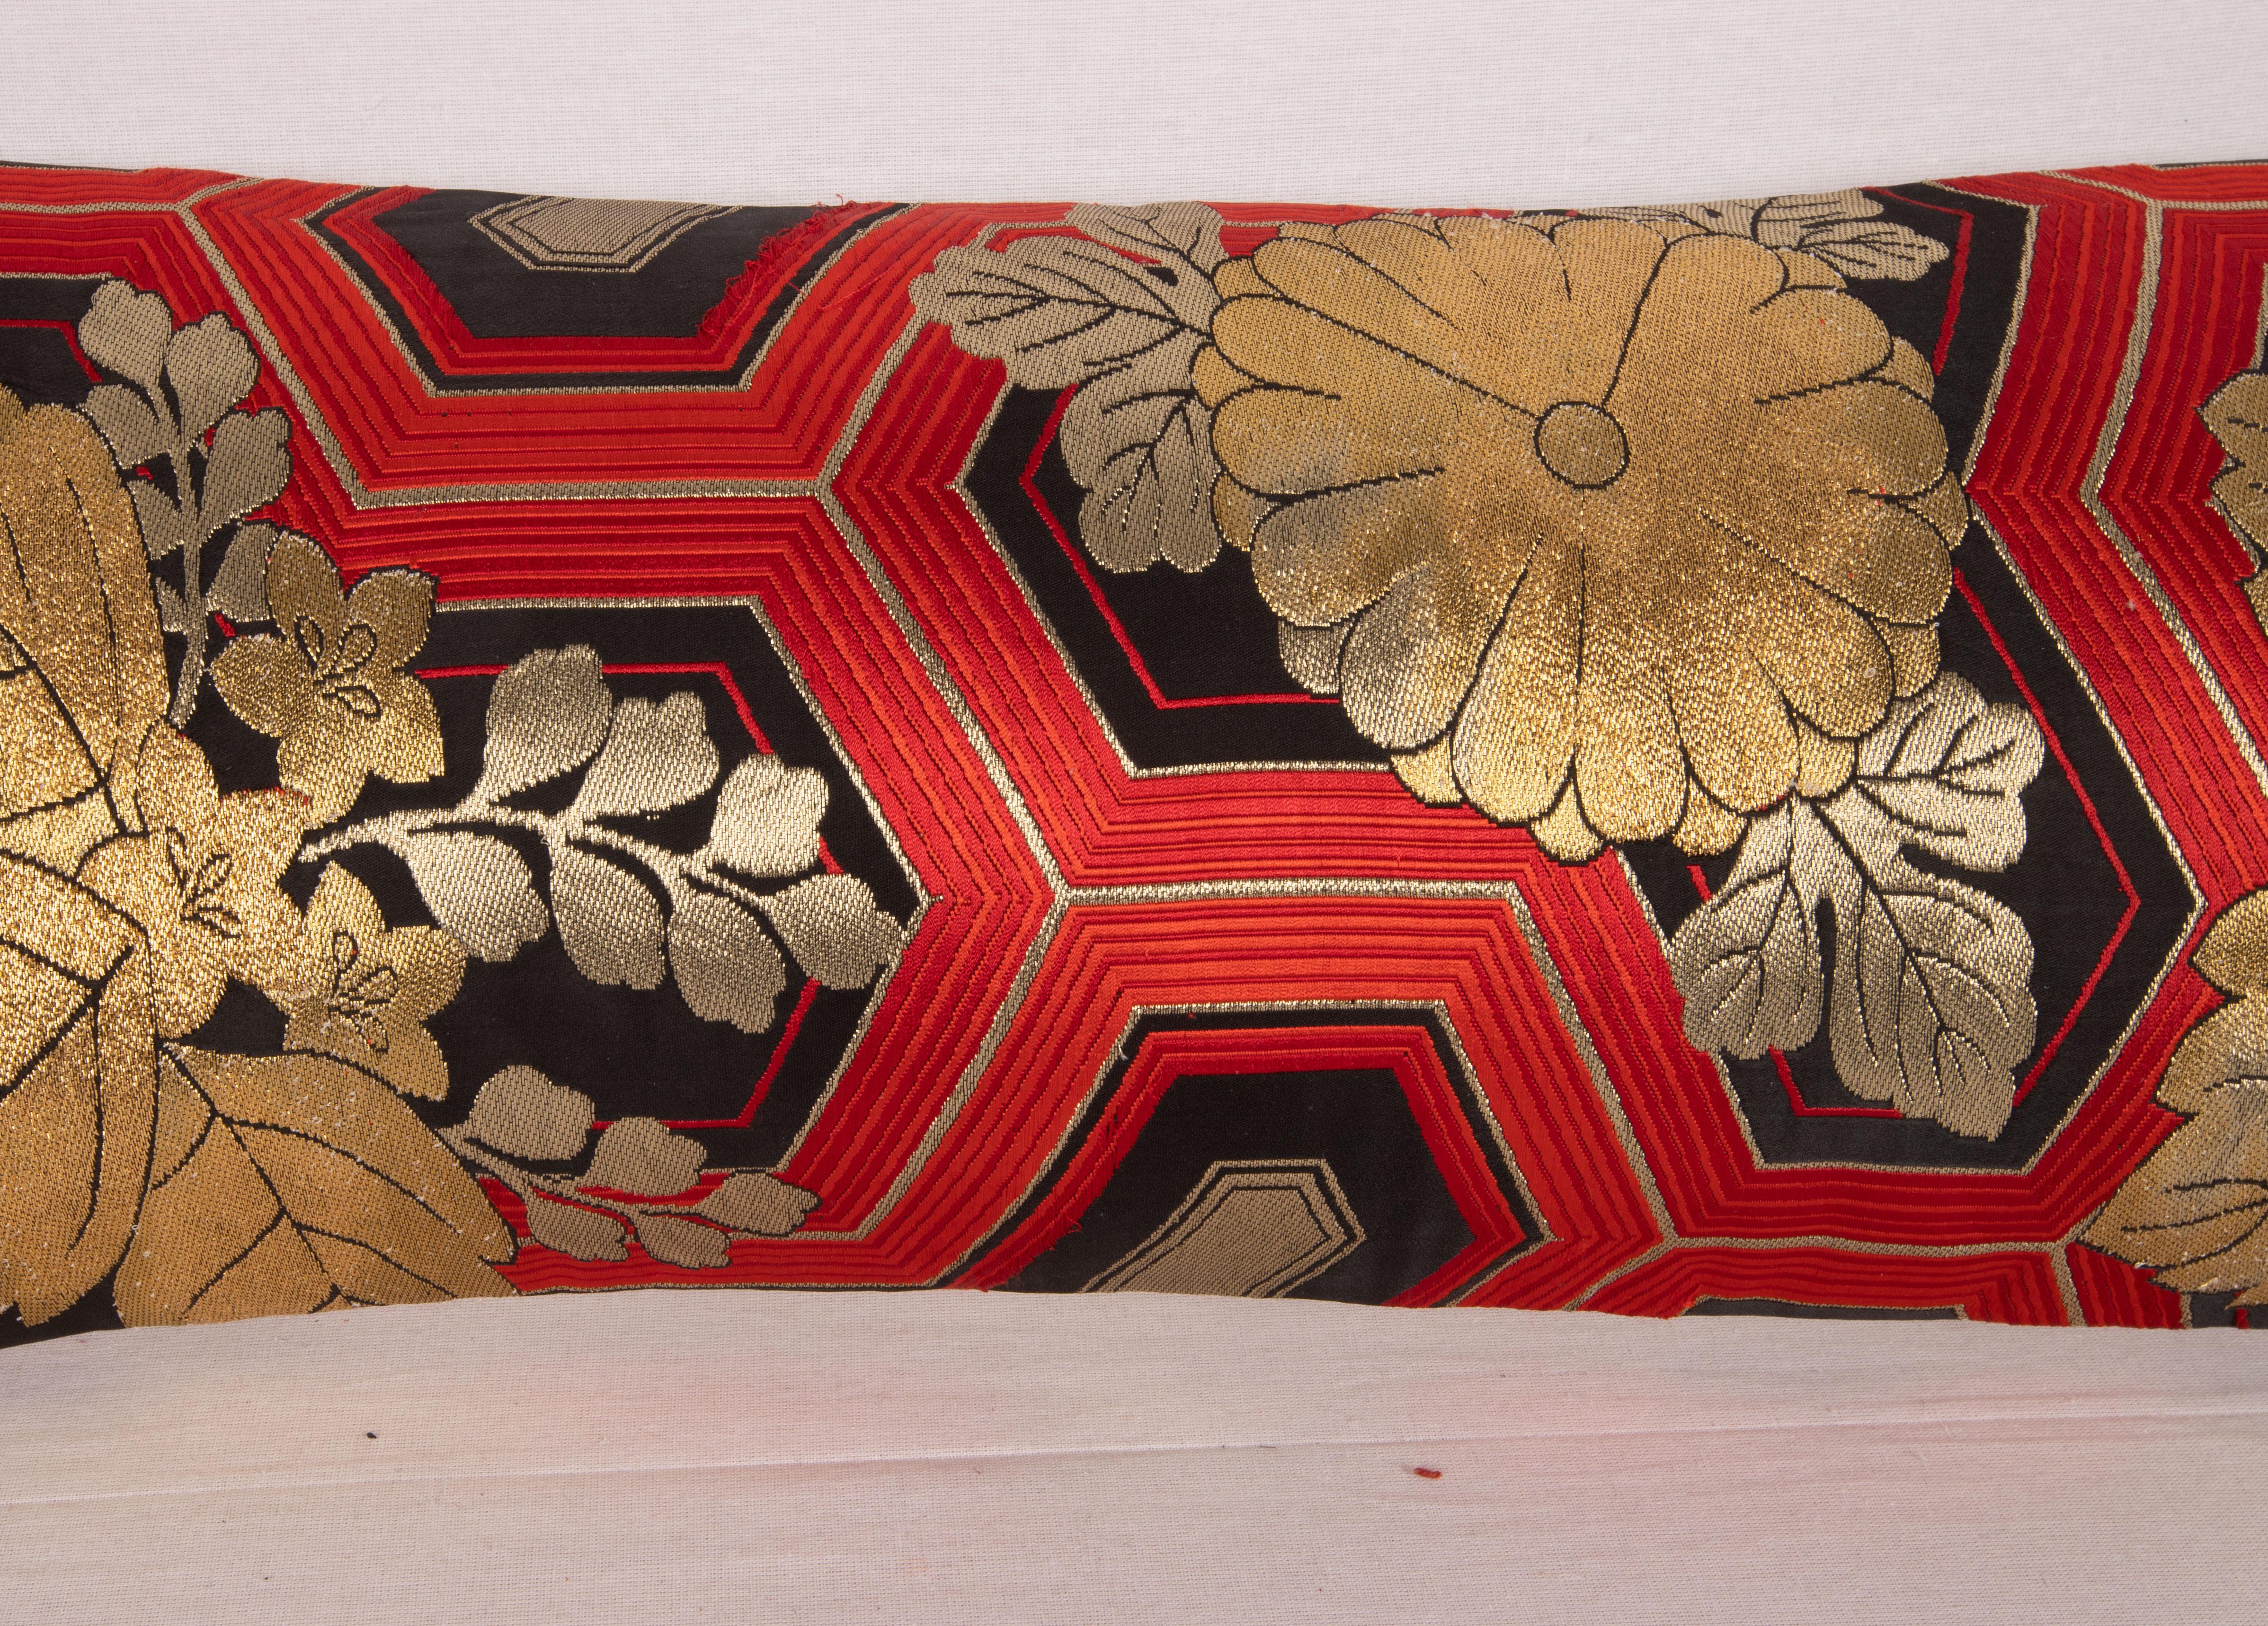 Hand-Woven Obi Pillow Cover, Japan, Mid 20th C. For Sale